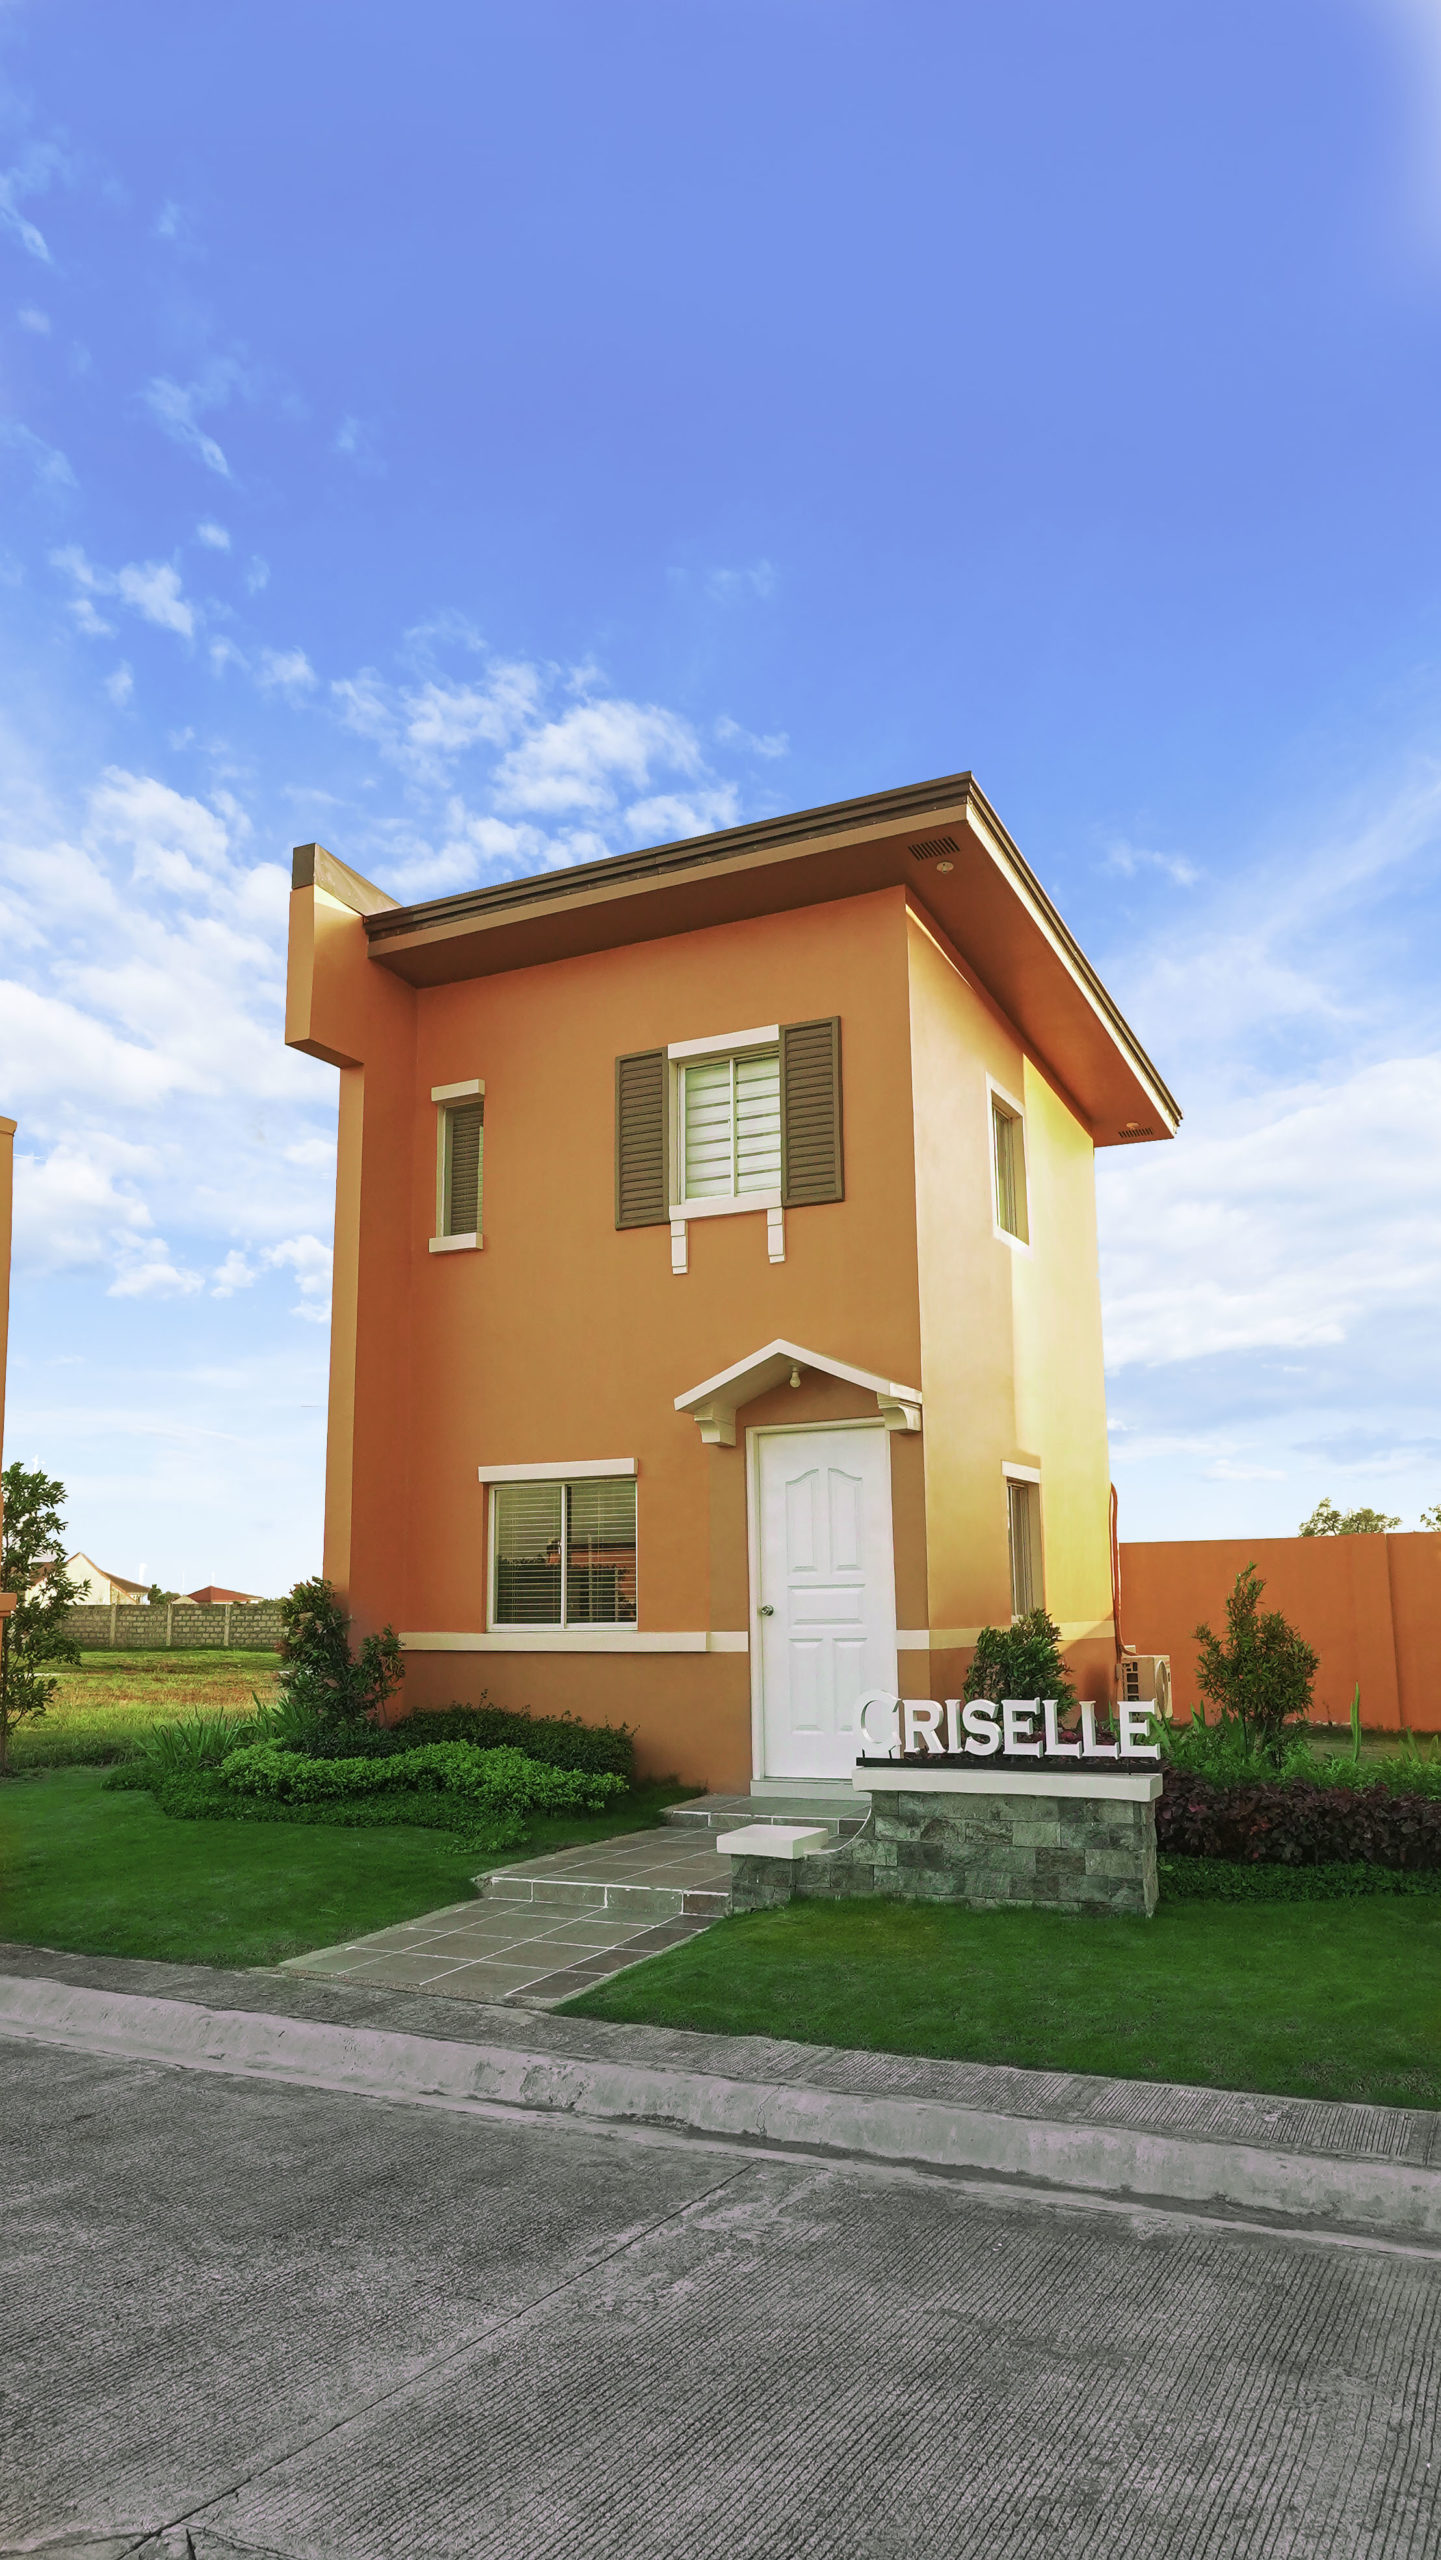 Affordable house and lot in Cabanatauan City Criselle unit 63 Lot area